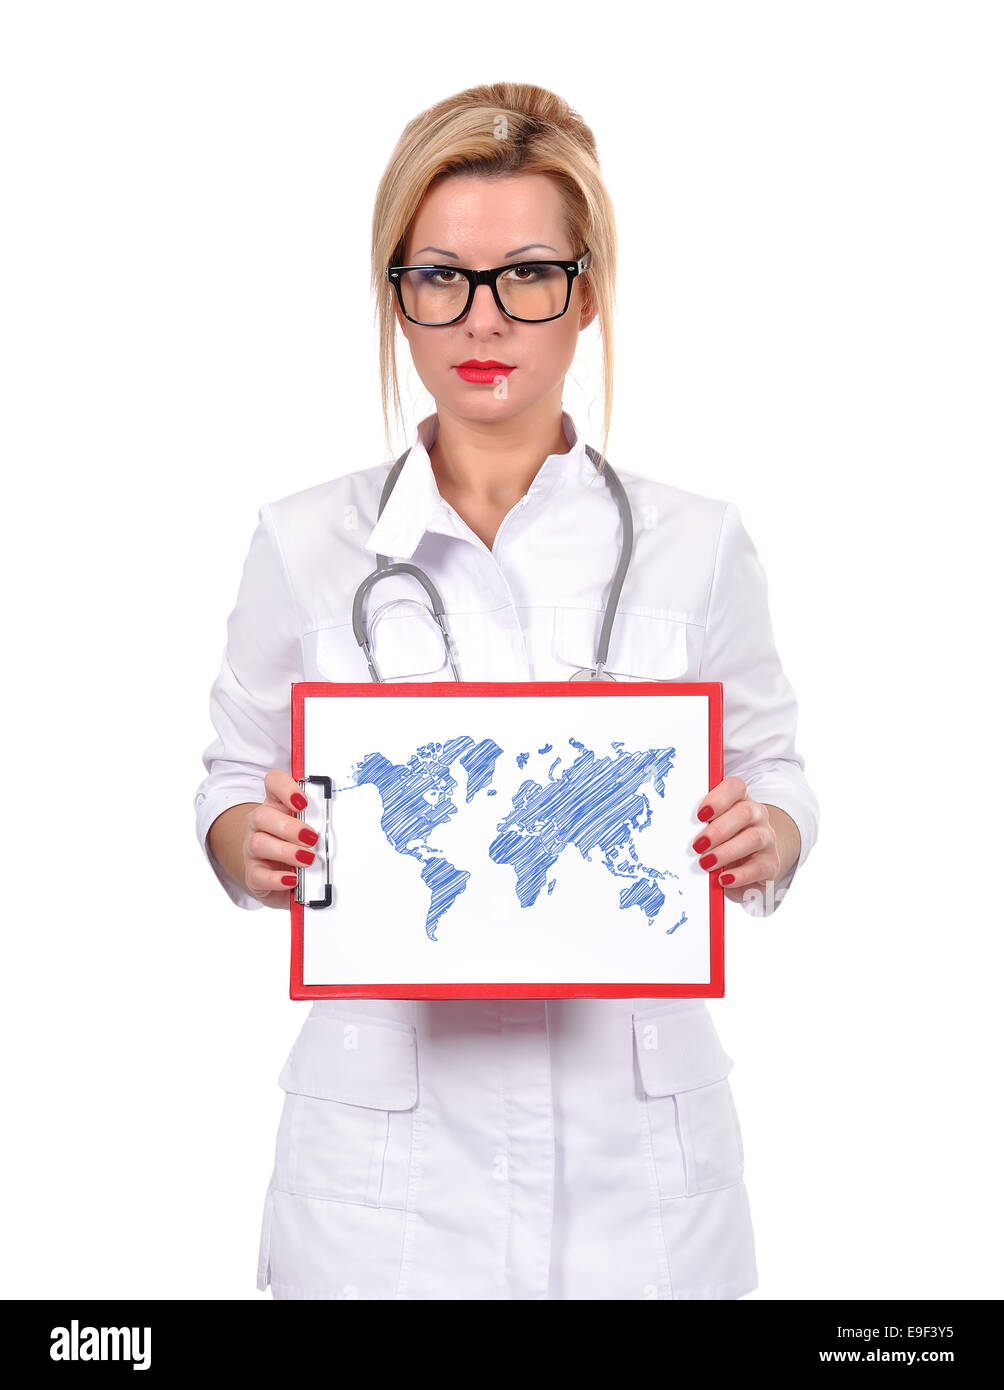 female doctor holding cloipboard with drawing world map Stock Photo